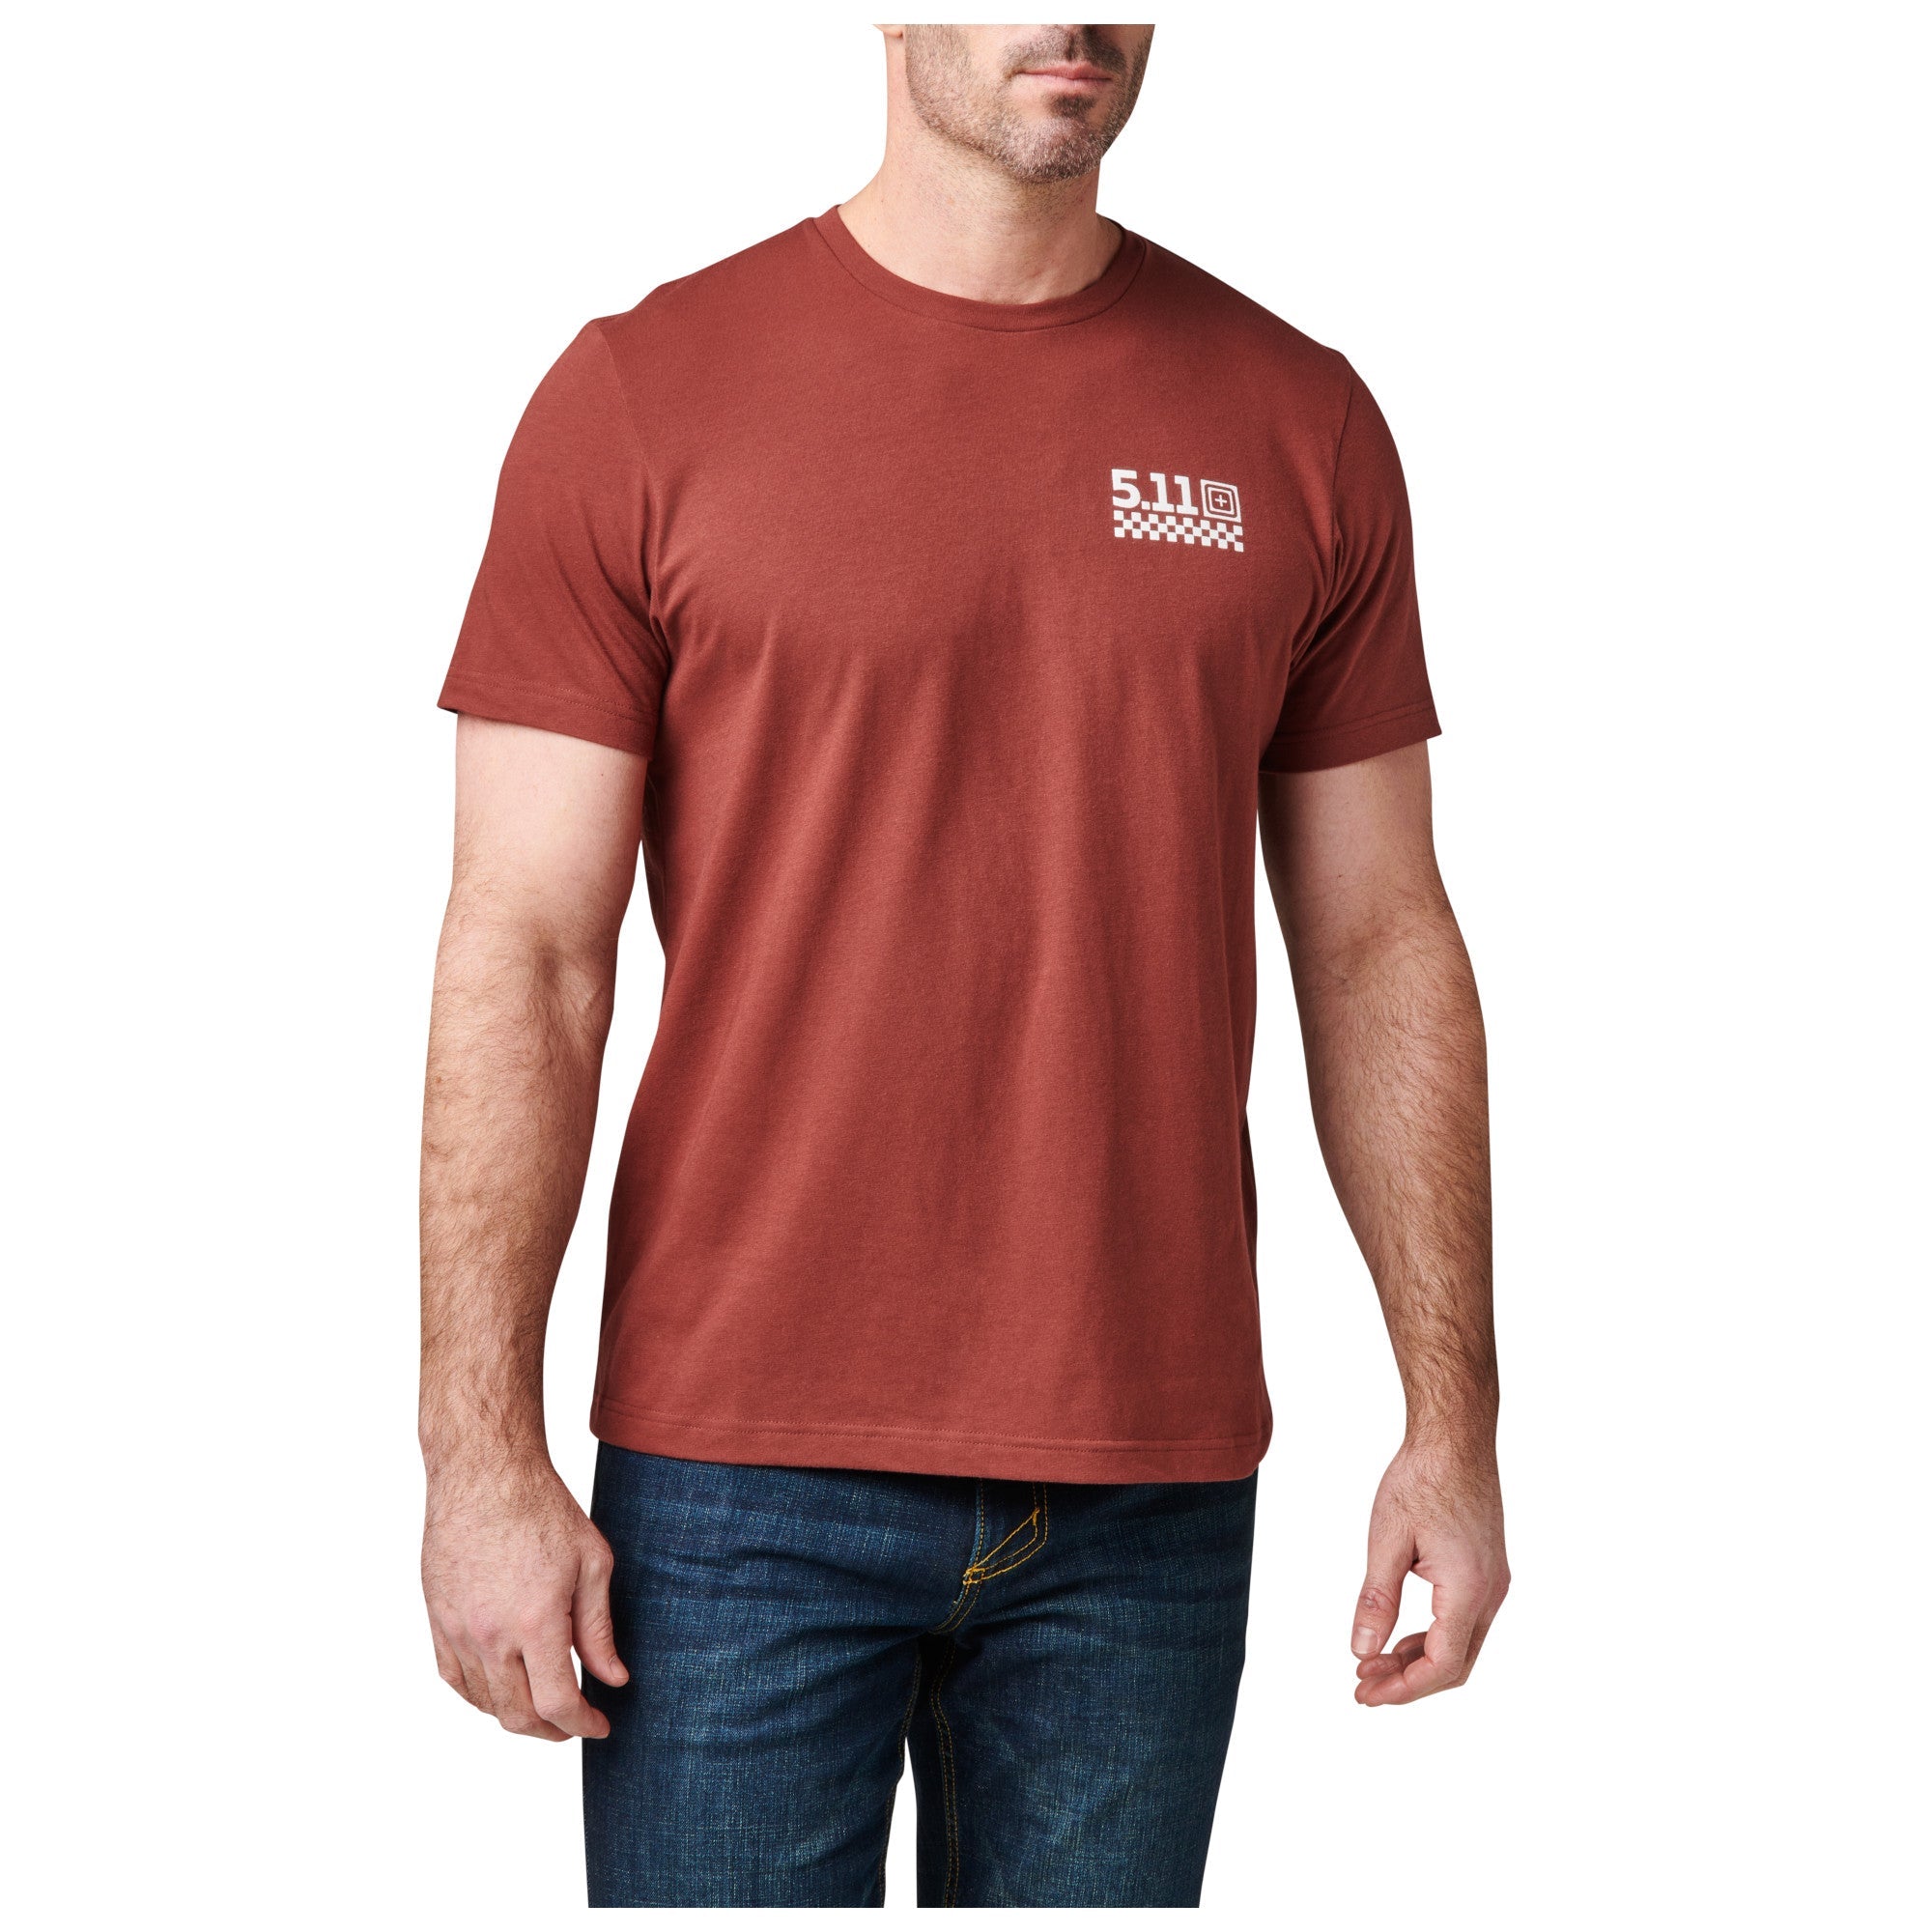 5.11 Tactical Free Delivery Tee Spartan Tactical Gear Australia Supplier Distributor Dealer